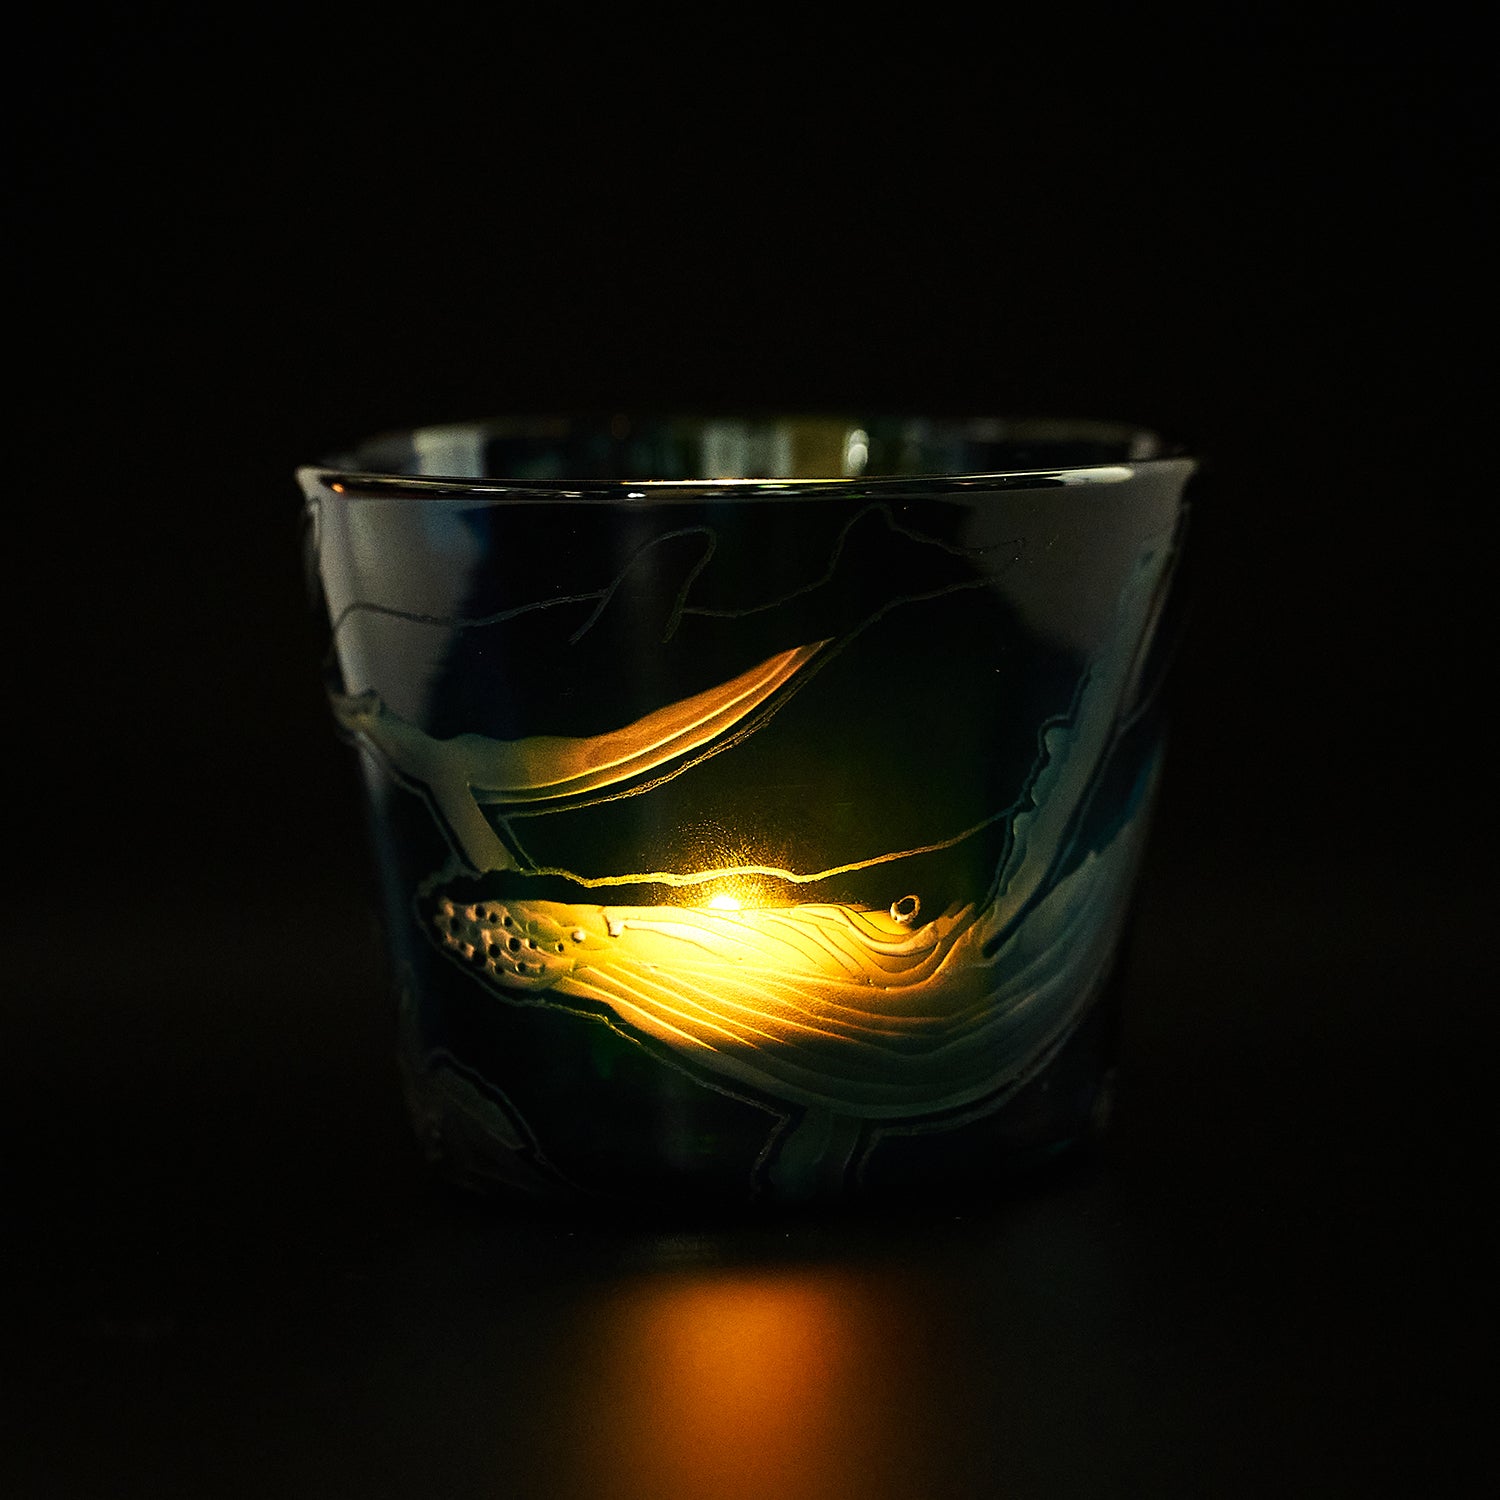 A candle inside. diameter 10 × height 7.6 cm /3.9″ × 3.0″